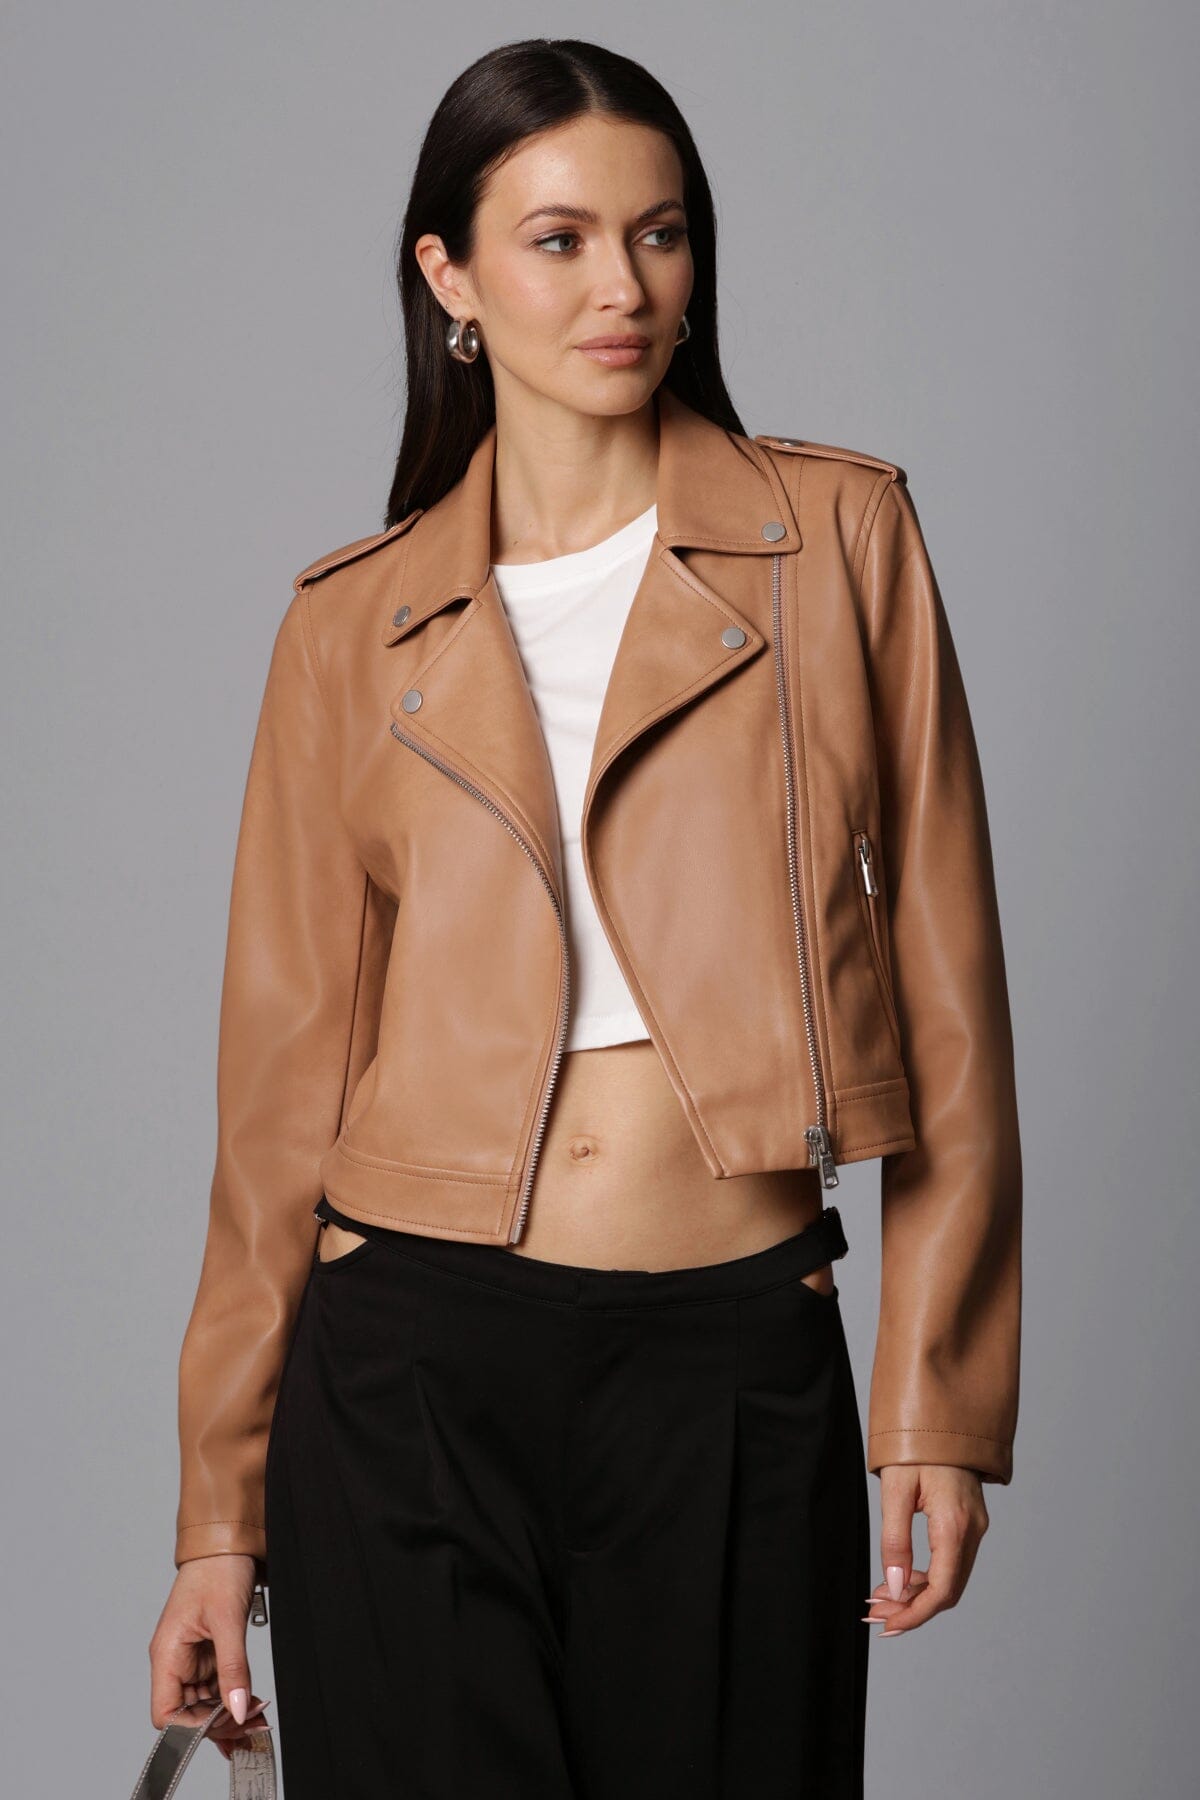 faux ever leather classic biker jacket camel brown - women's figure flattering office to date night jackets